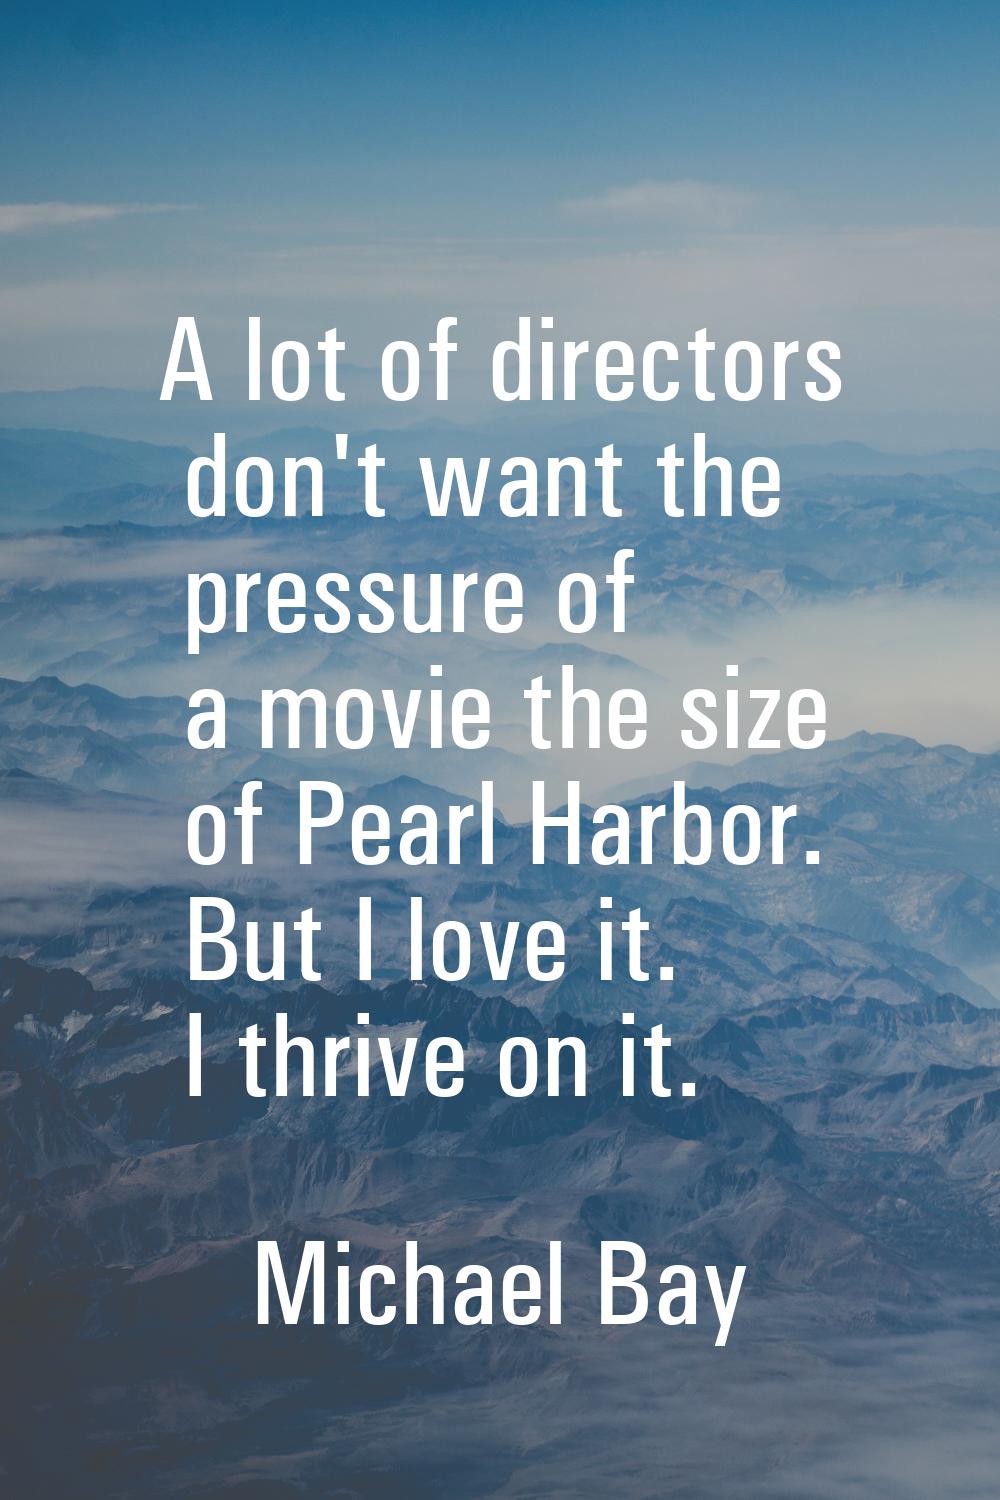 A lot of directors don't want the pressure of a movie the size of Pearl Harbor. But I love it. I th